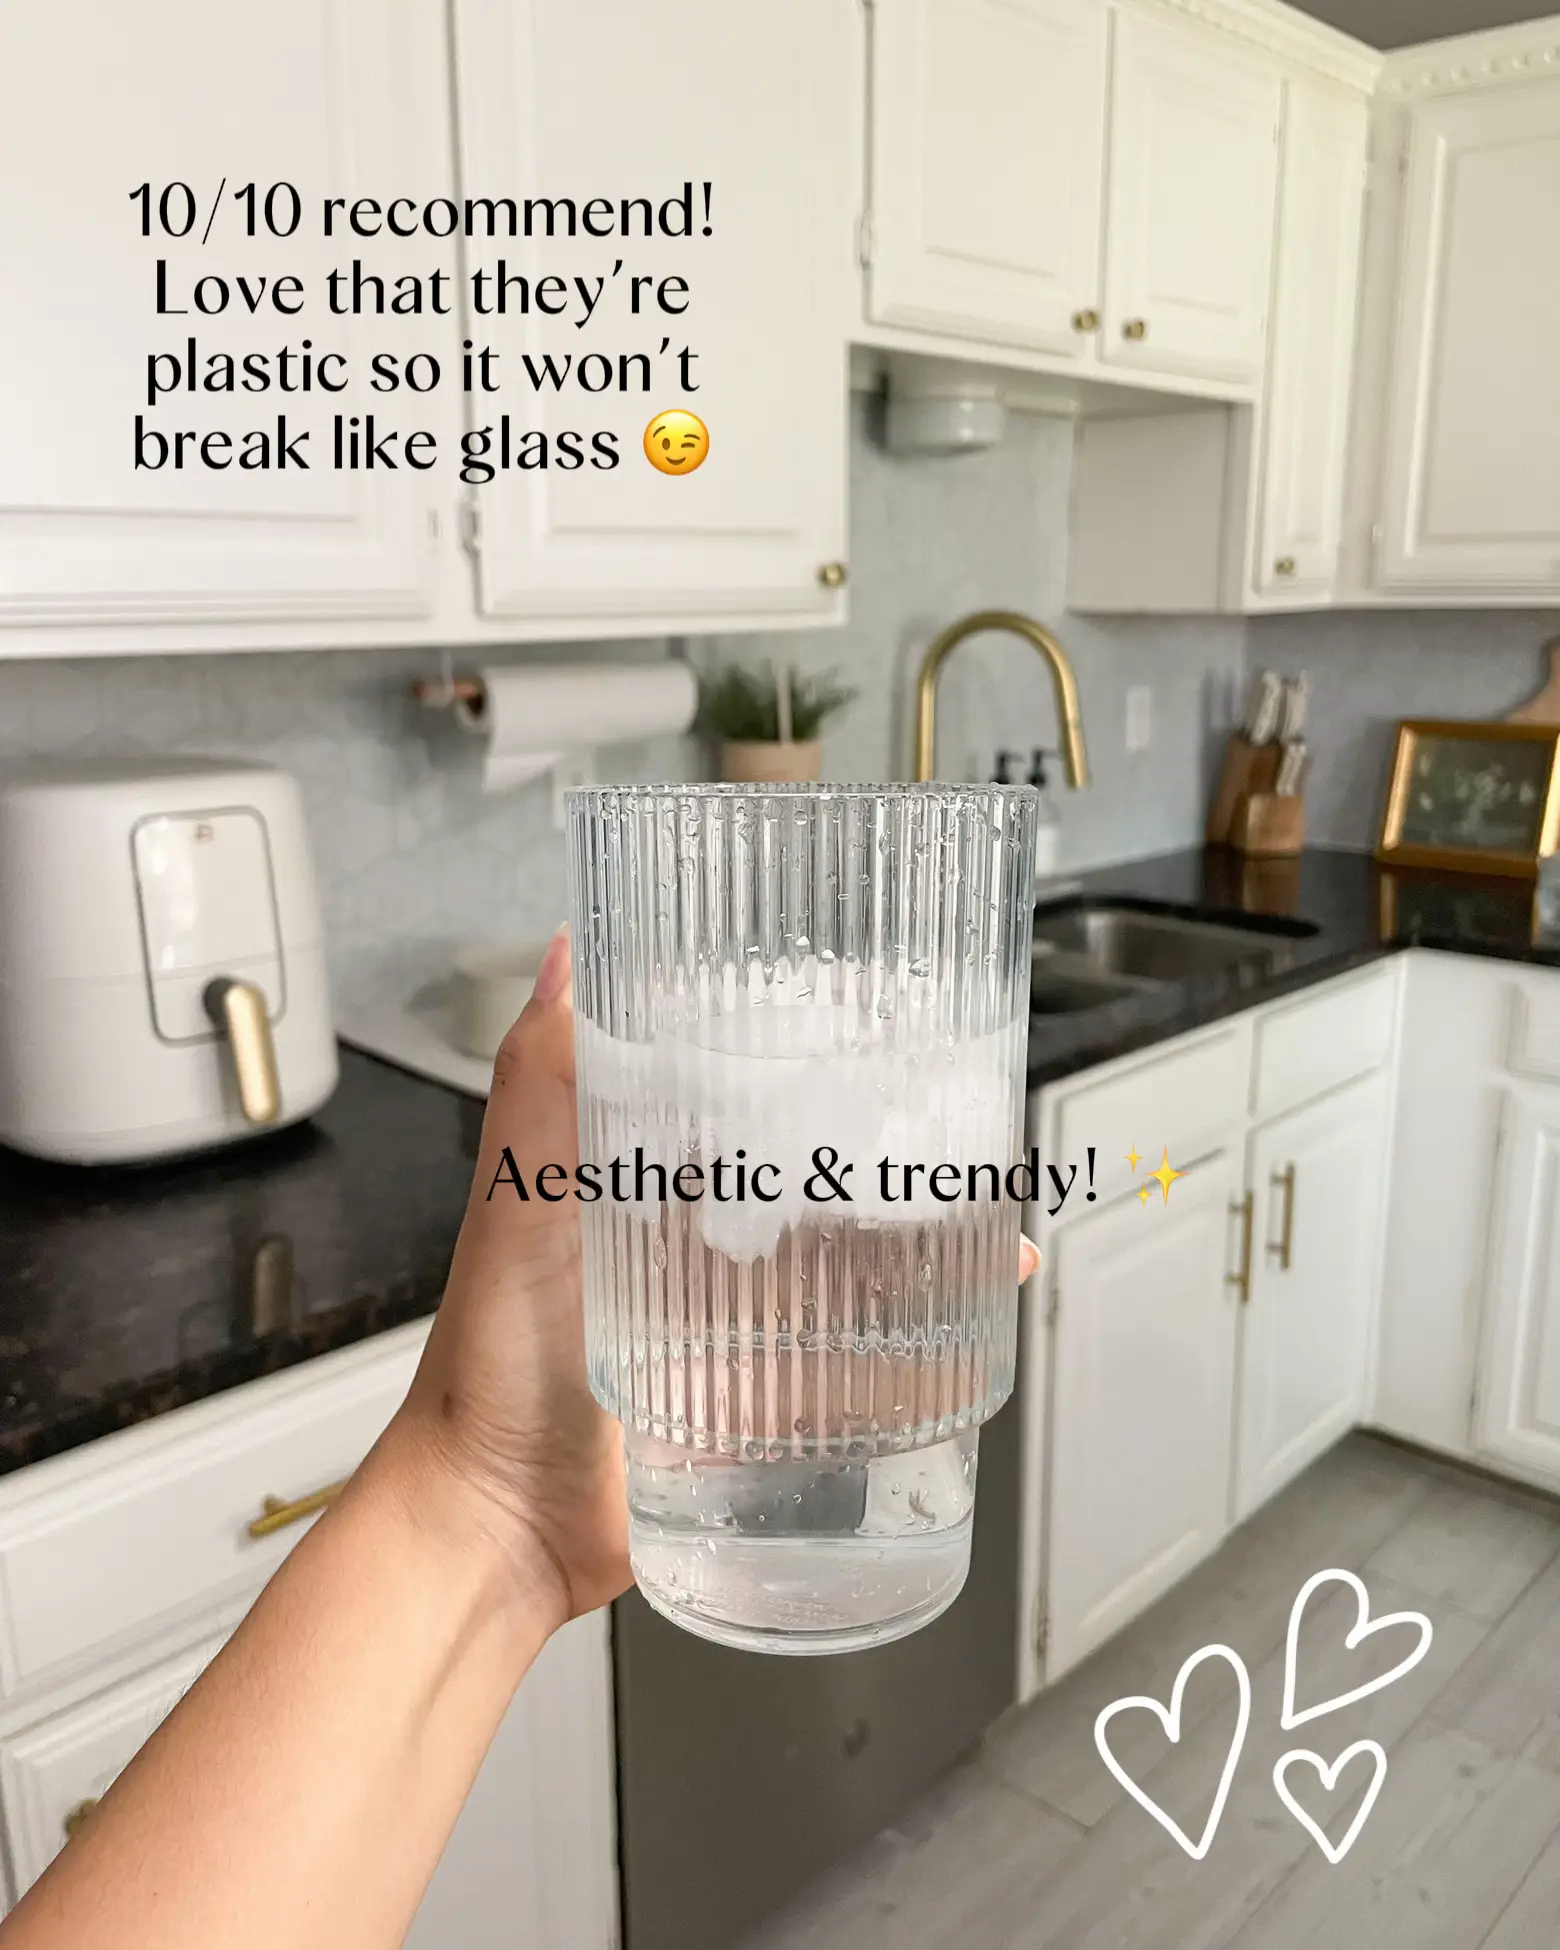 walmart has these gorgeous ribbed plastic ware cups for $1! Such a cu